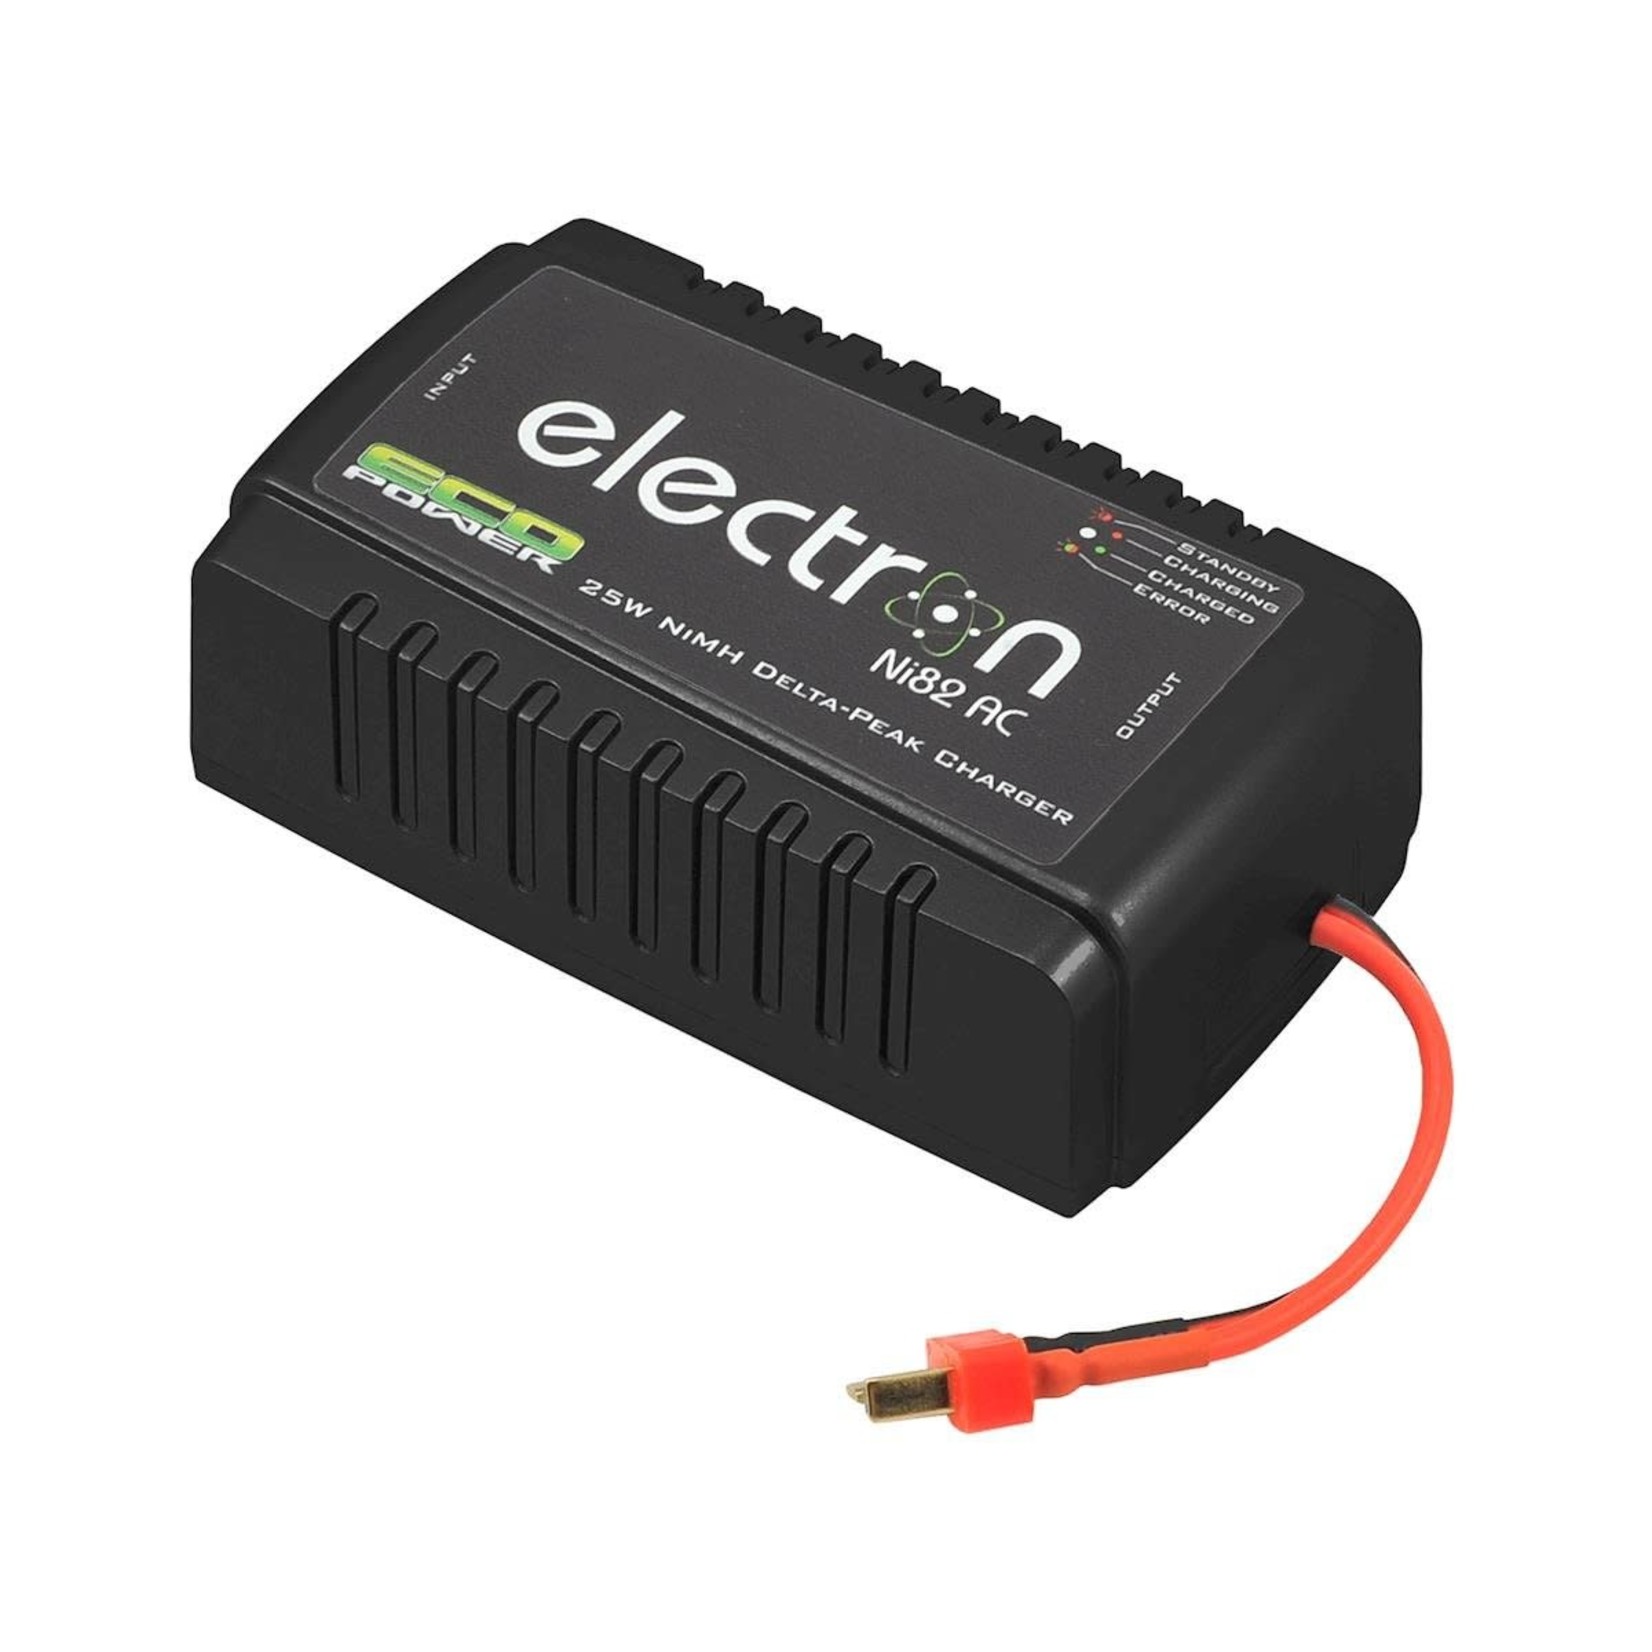 EcoPower EcoPower "Electron Ni82 AC" NiMH/NiCd Battery Charger (1-8 Cells/2A/25W)